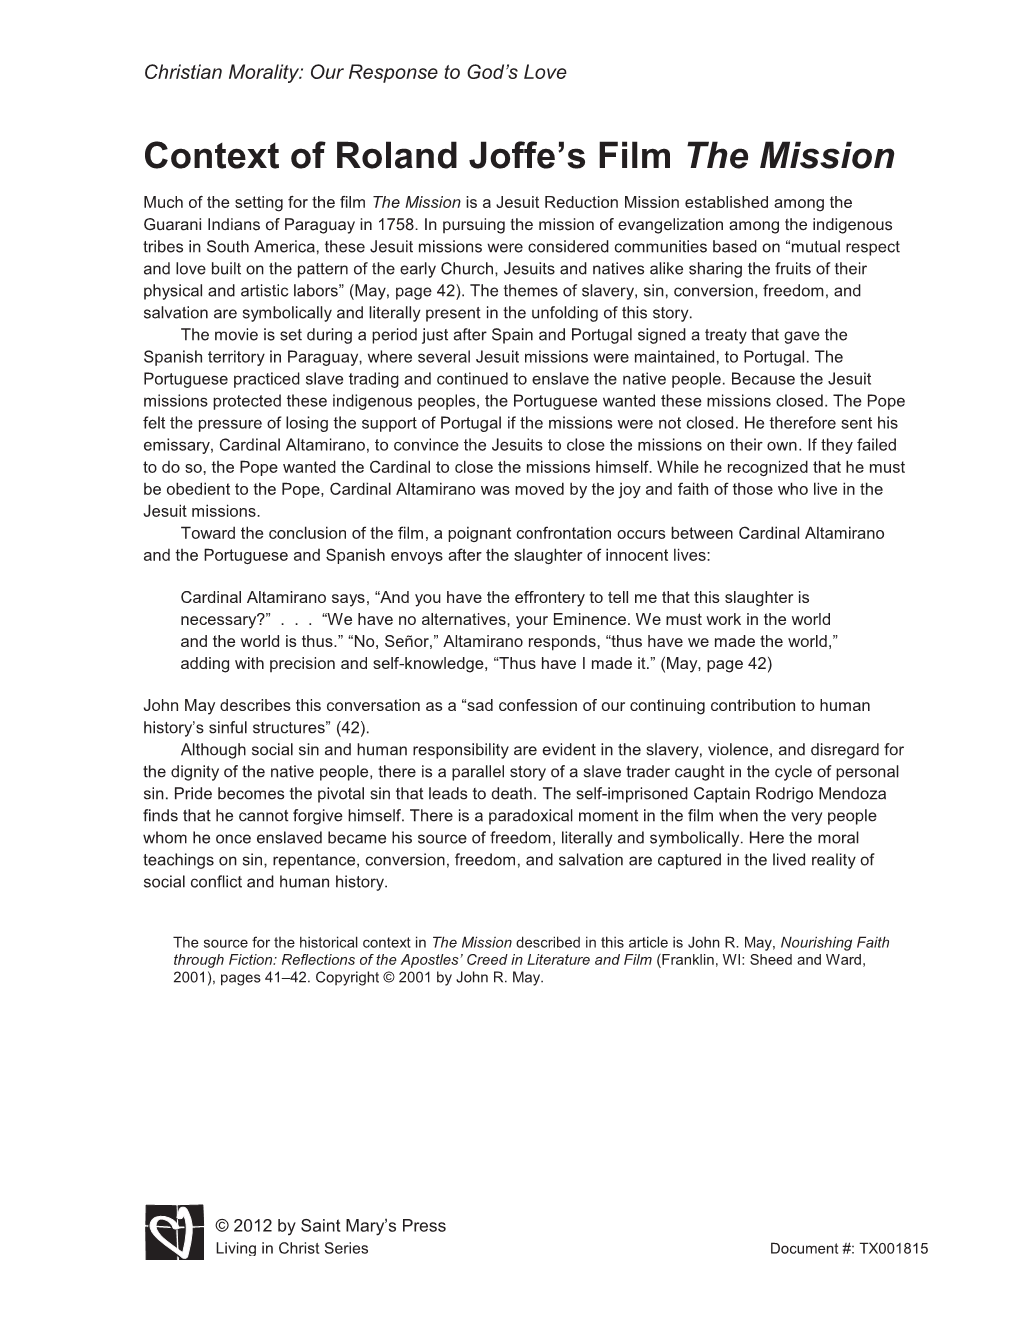 Context of Roland Joffe's Film the Mission